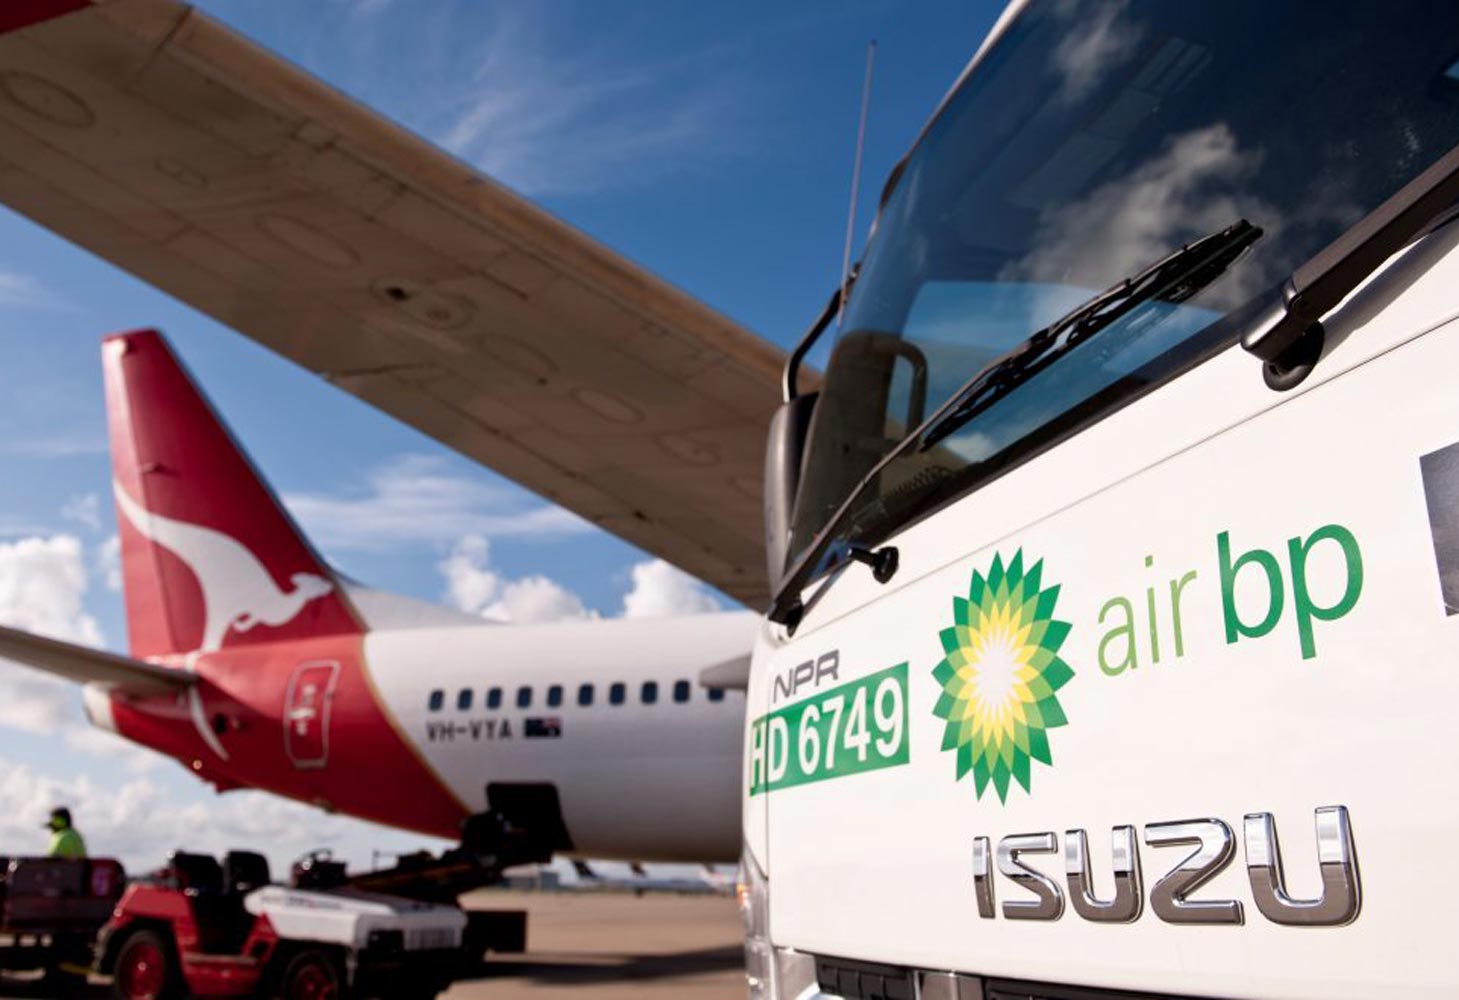 Qantas and bp partner to advance sustainable aviation fuels in Australia